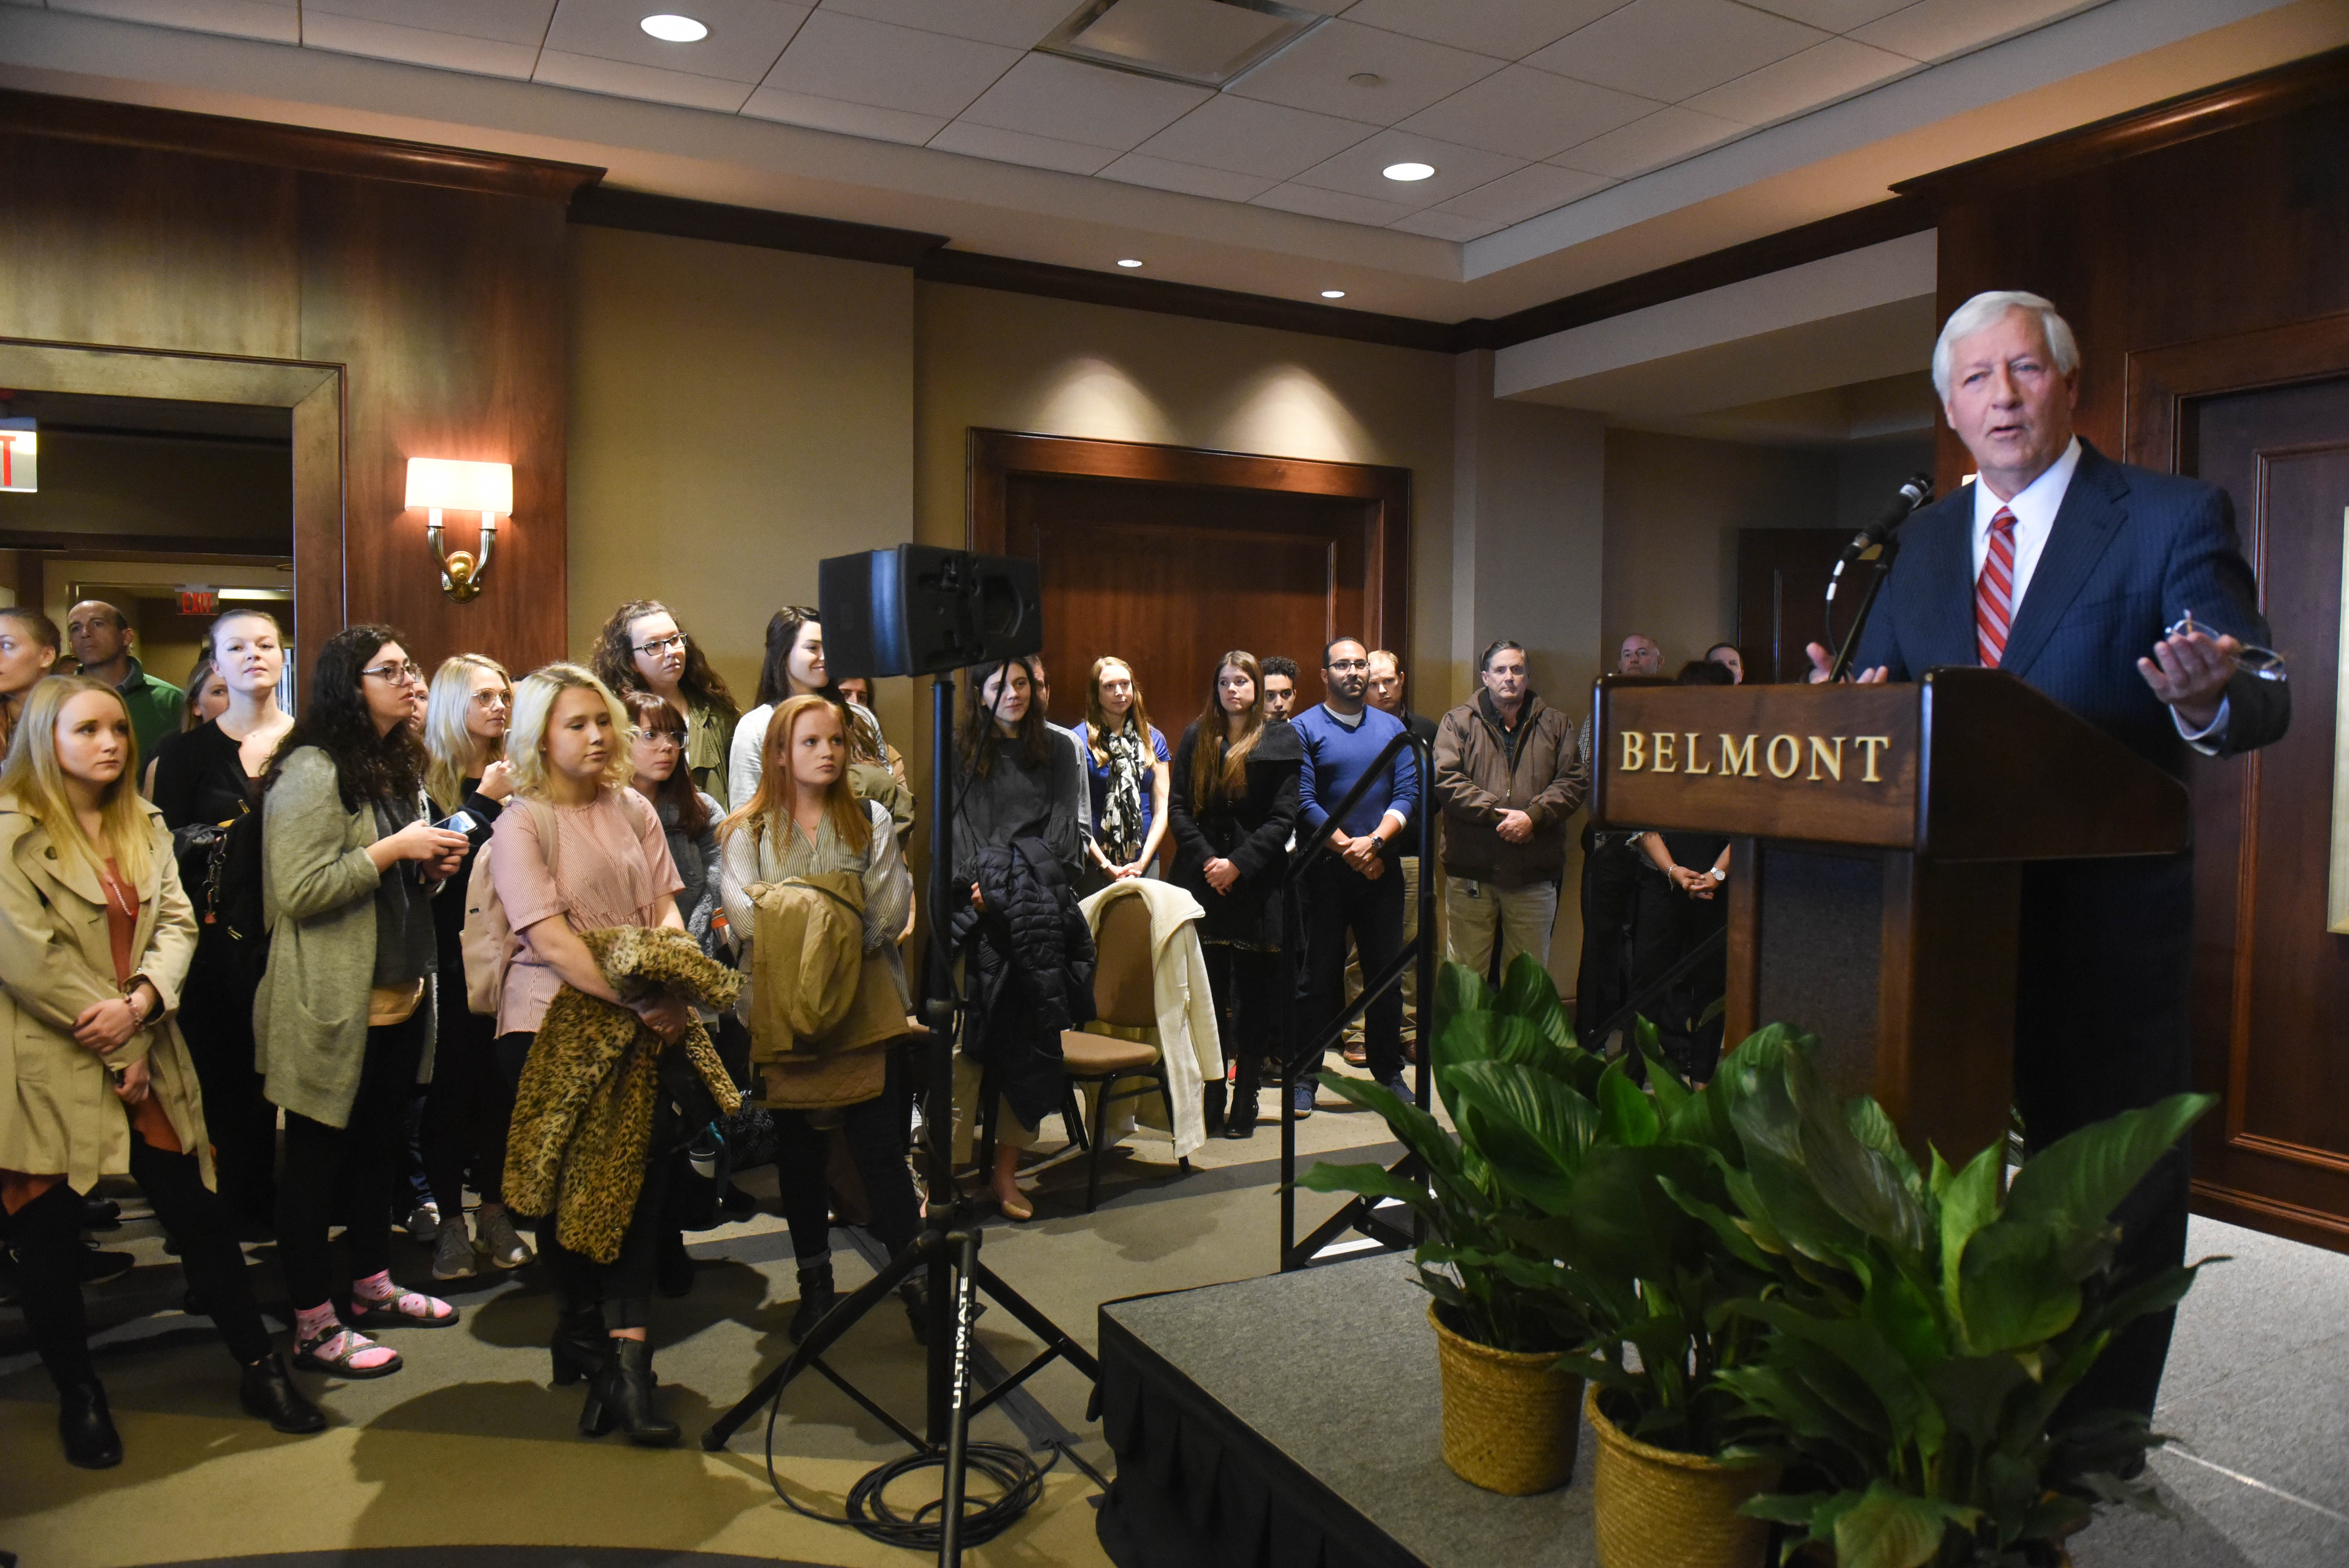 Dr. Bob Fisher makes the announcement that Belmont is acquiring Franklin-based OÕMore College of Design, bringing new programs in fashion and interior design, as well as fashion merchandising, to this campus in an announcement by Shari Fox and Dr. Bob Fisher at Belmont University Nashville, Tennessee, February 13, 2018.